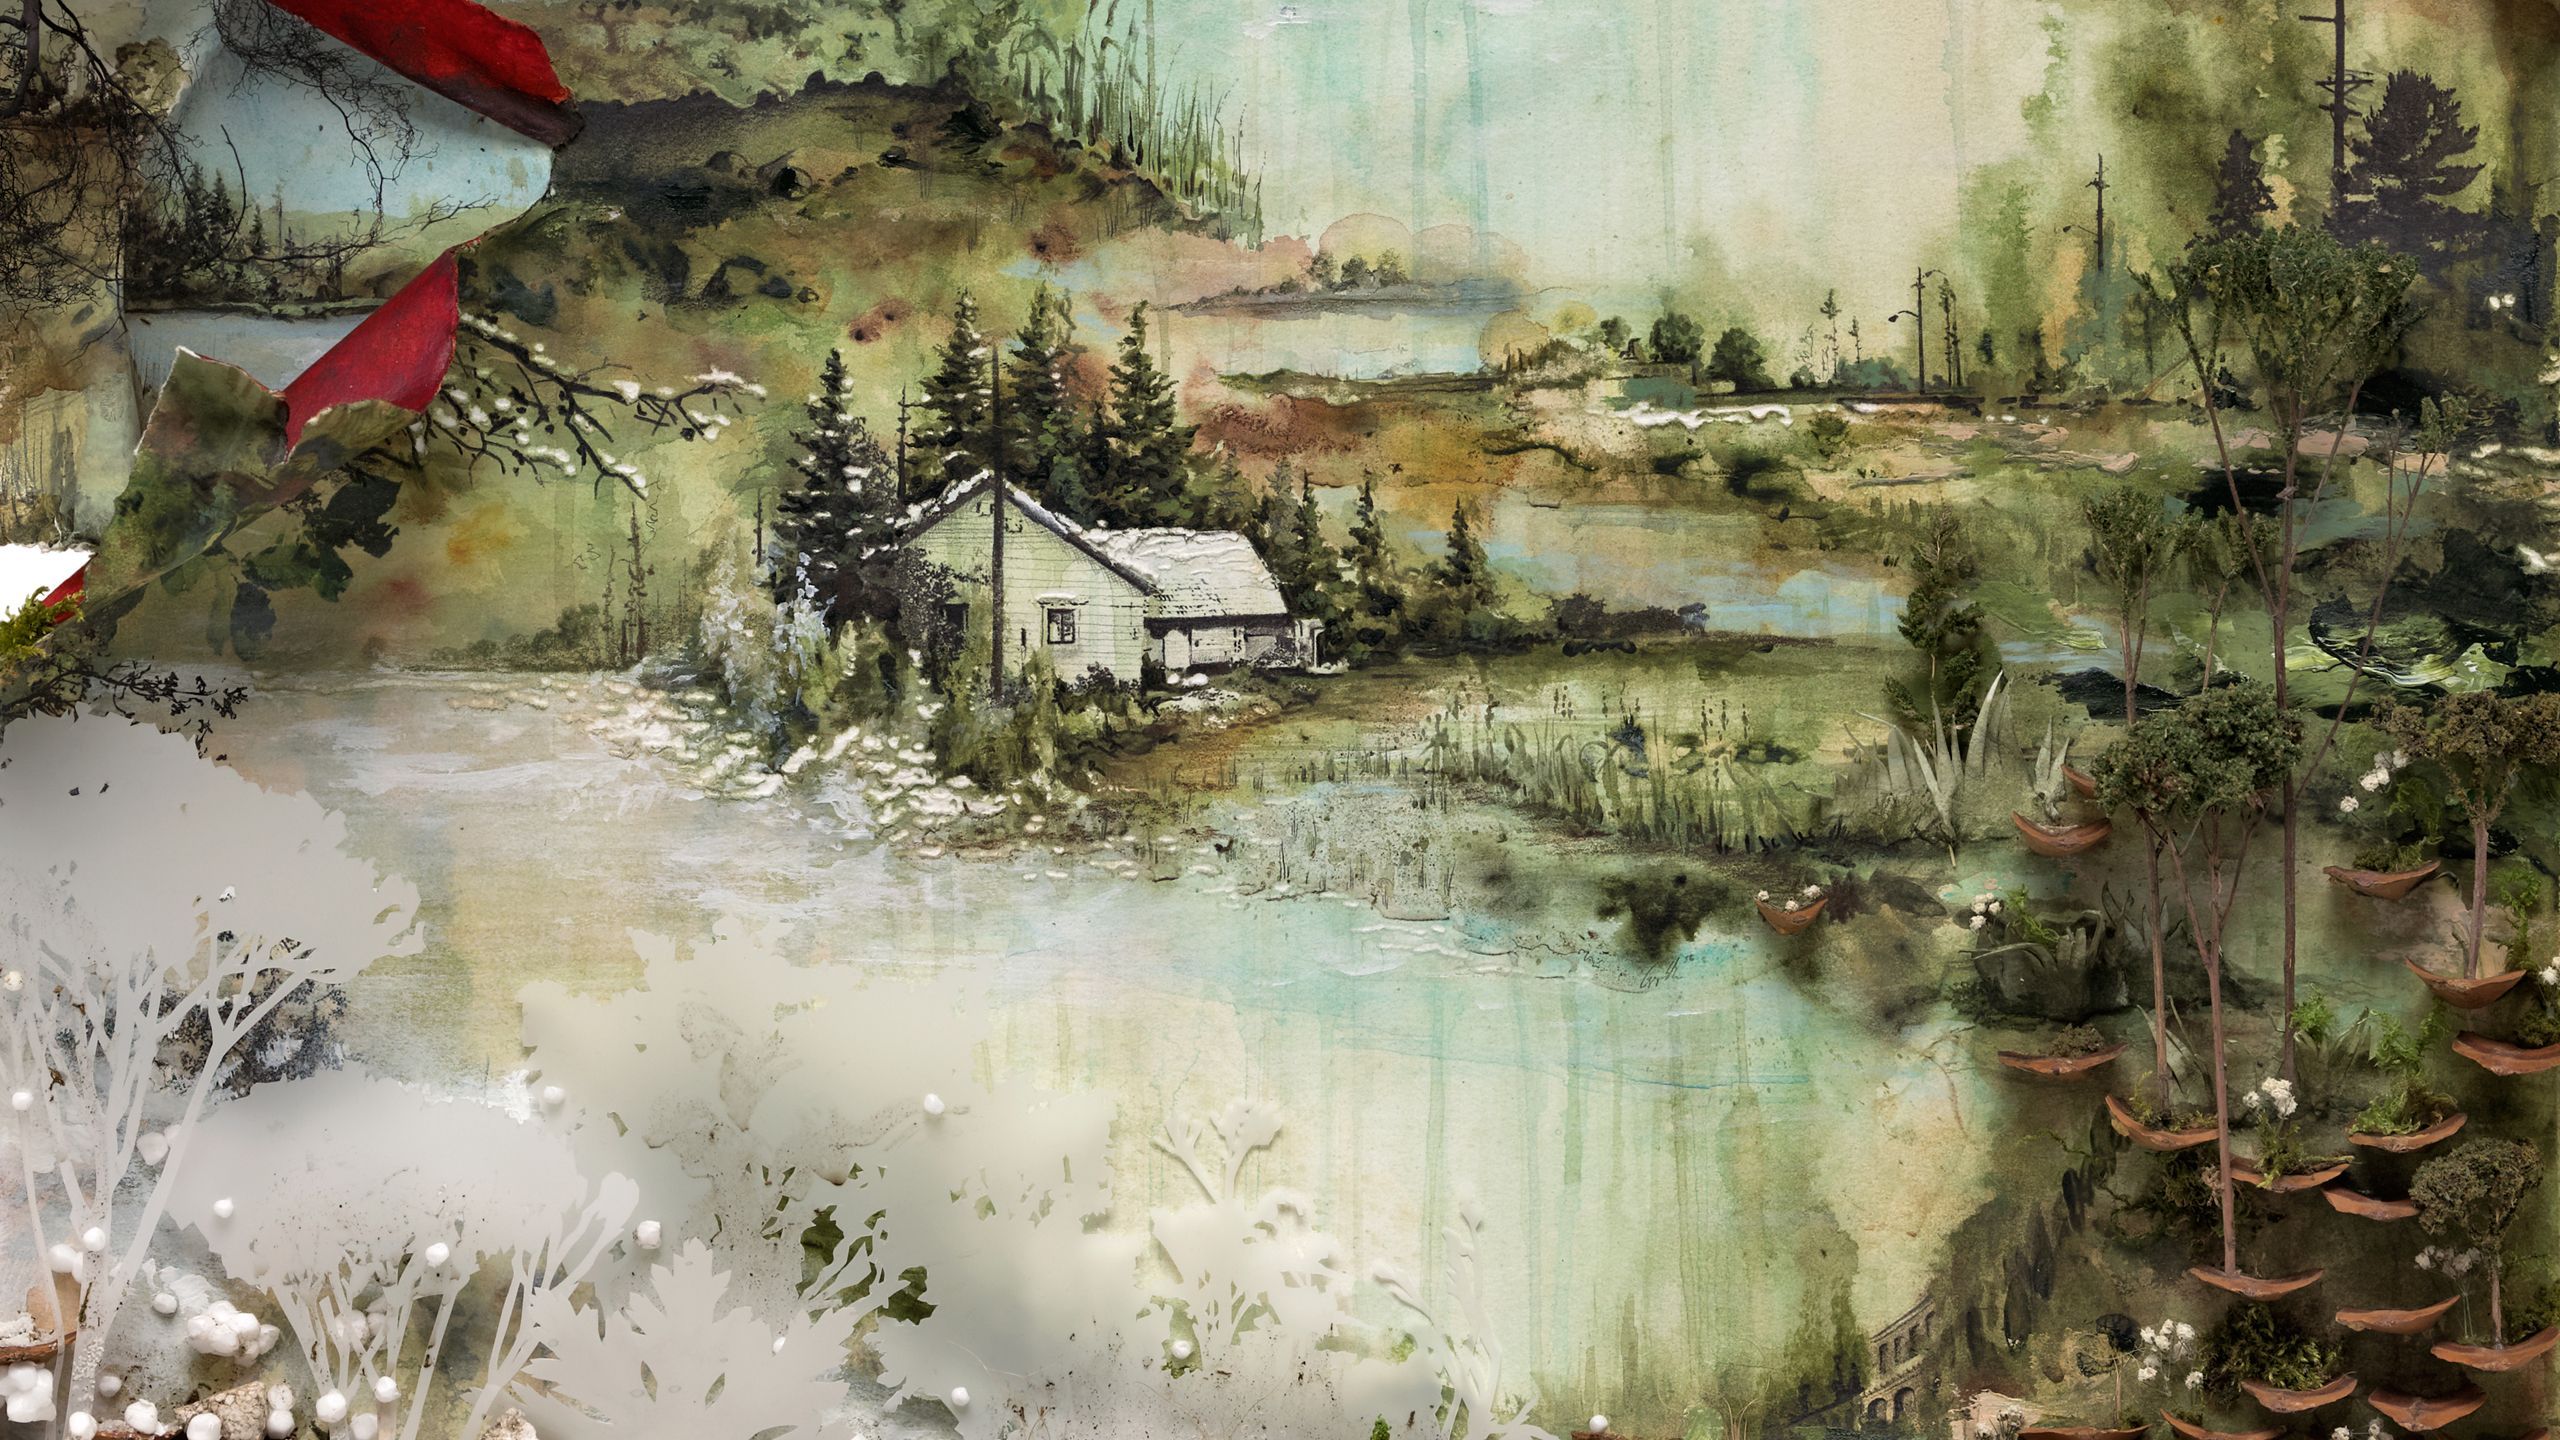 Bon Iver album cover by Gregory Euclide. Wallpaper project